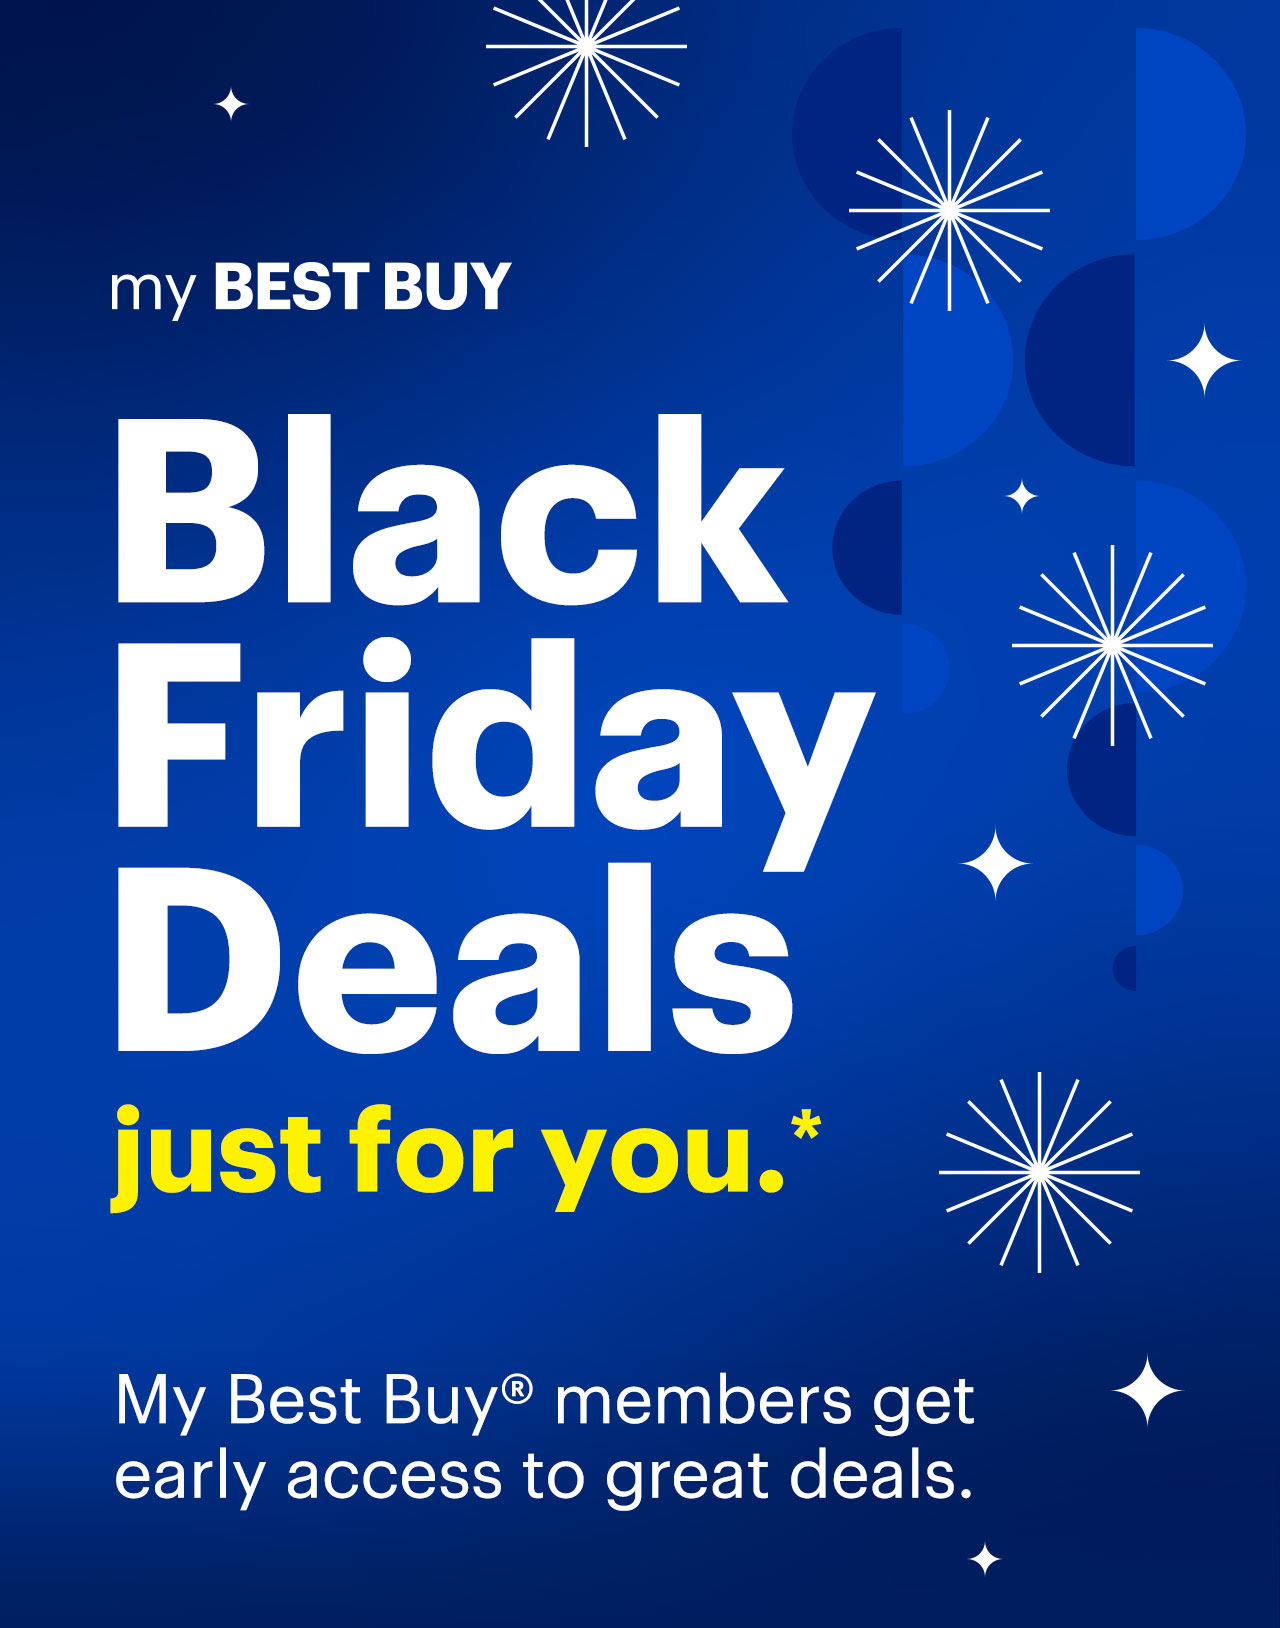 Black Friday Deals just for you. My Best Buy members get early access to great deals. Reference disclaimer.